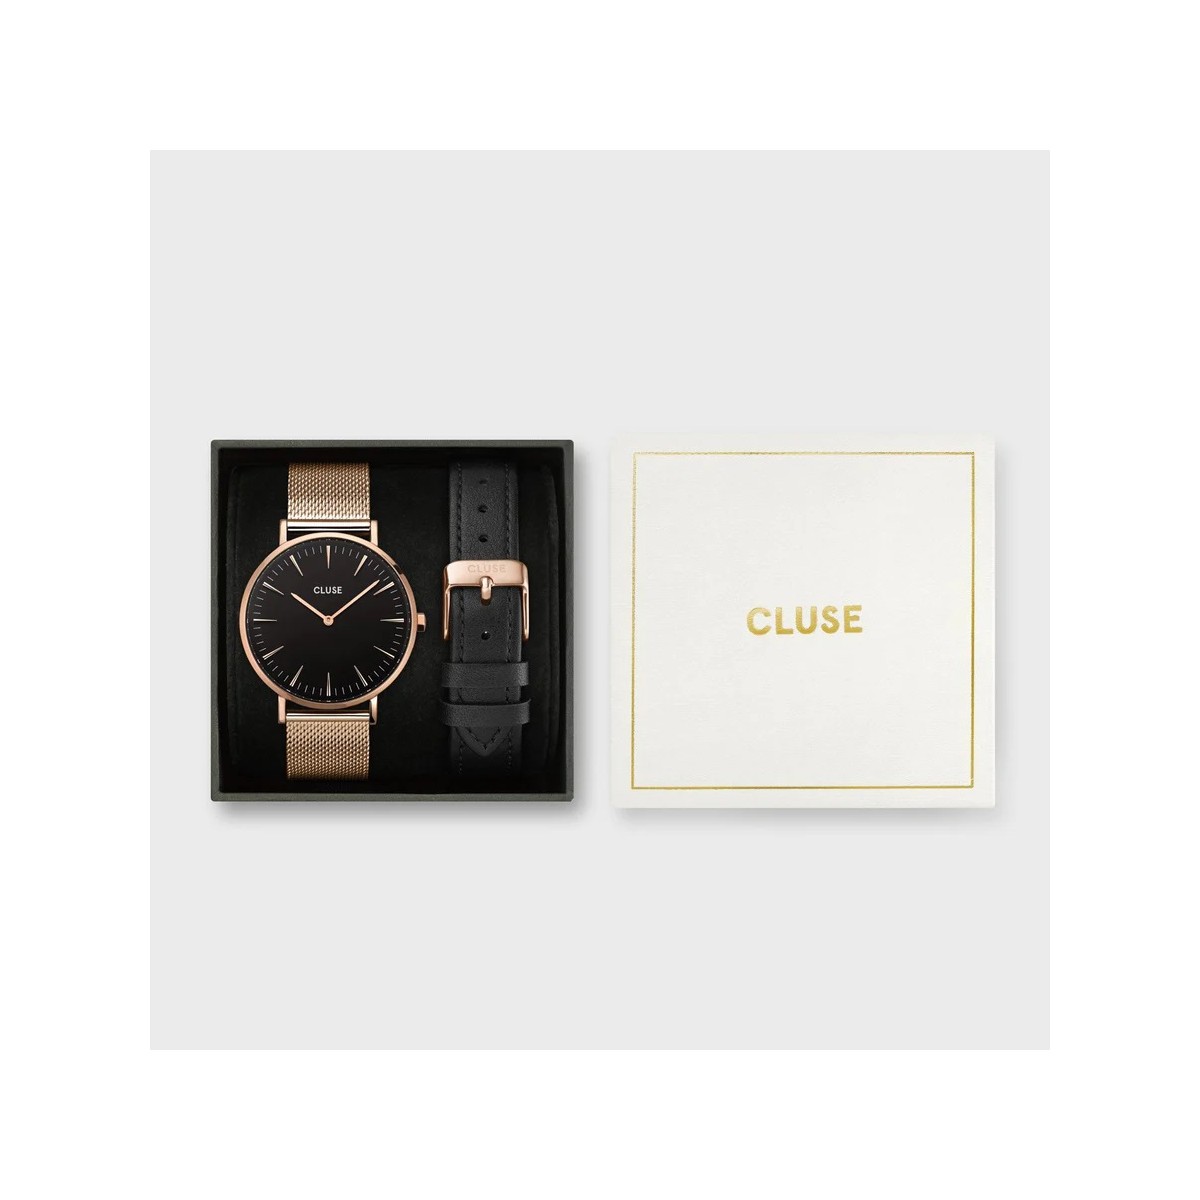 Reloj de mujer CLUSE Gift Box Boho Chic Mesh Watch & Leather Strap Rose Gold Colour CG10106